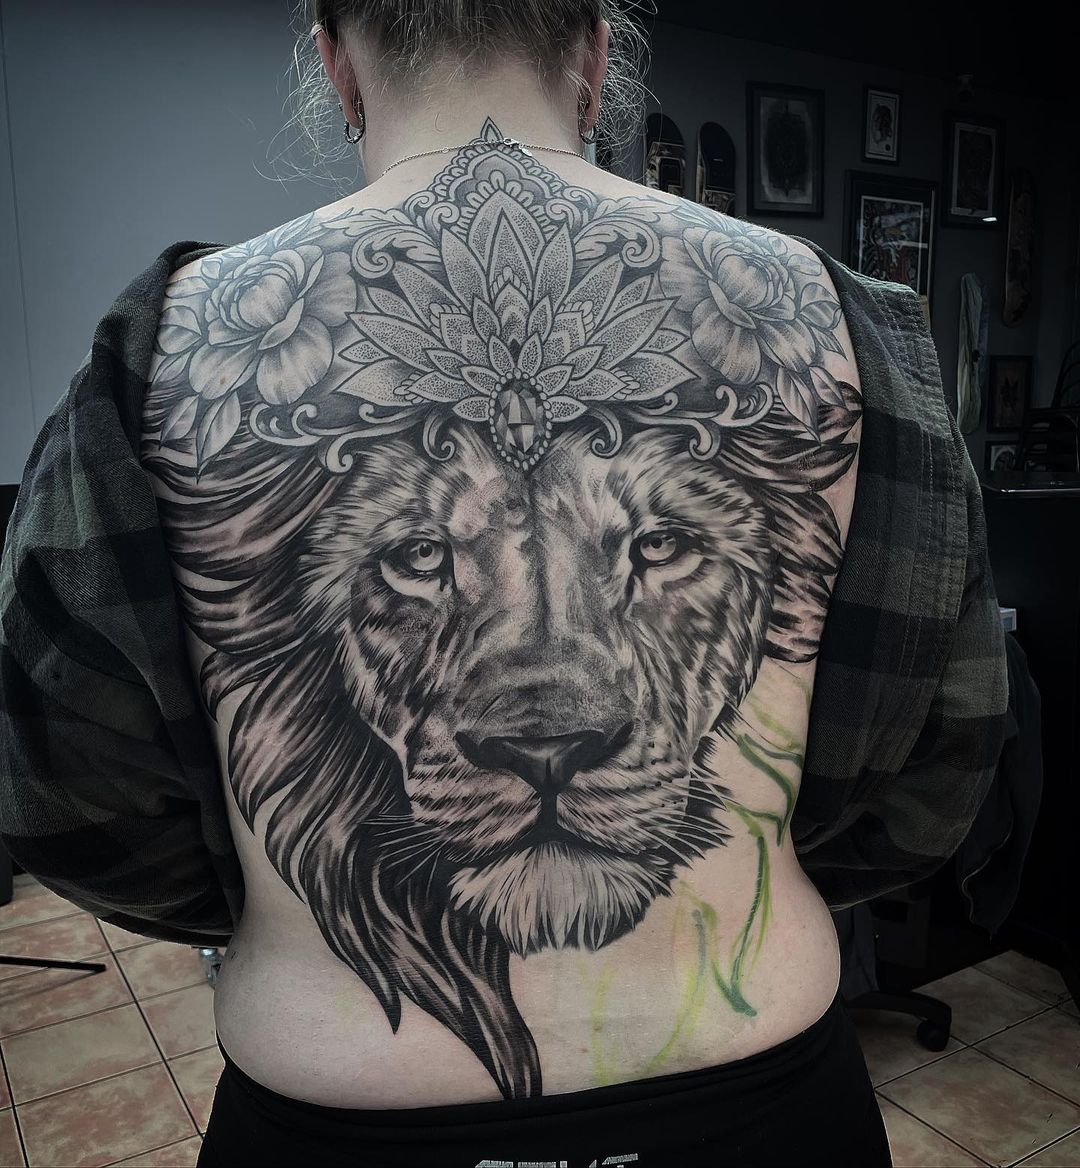 10 impressive back tattoos that are utter masterpieces | Daniel Swanick